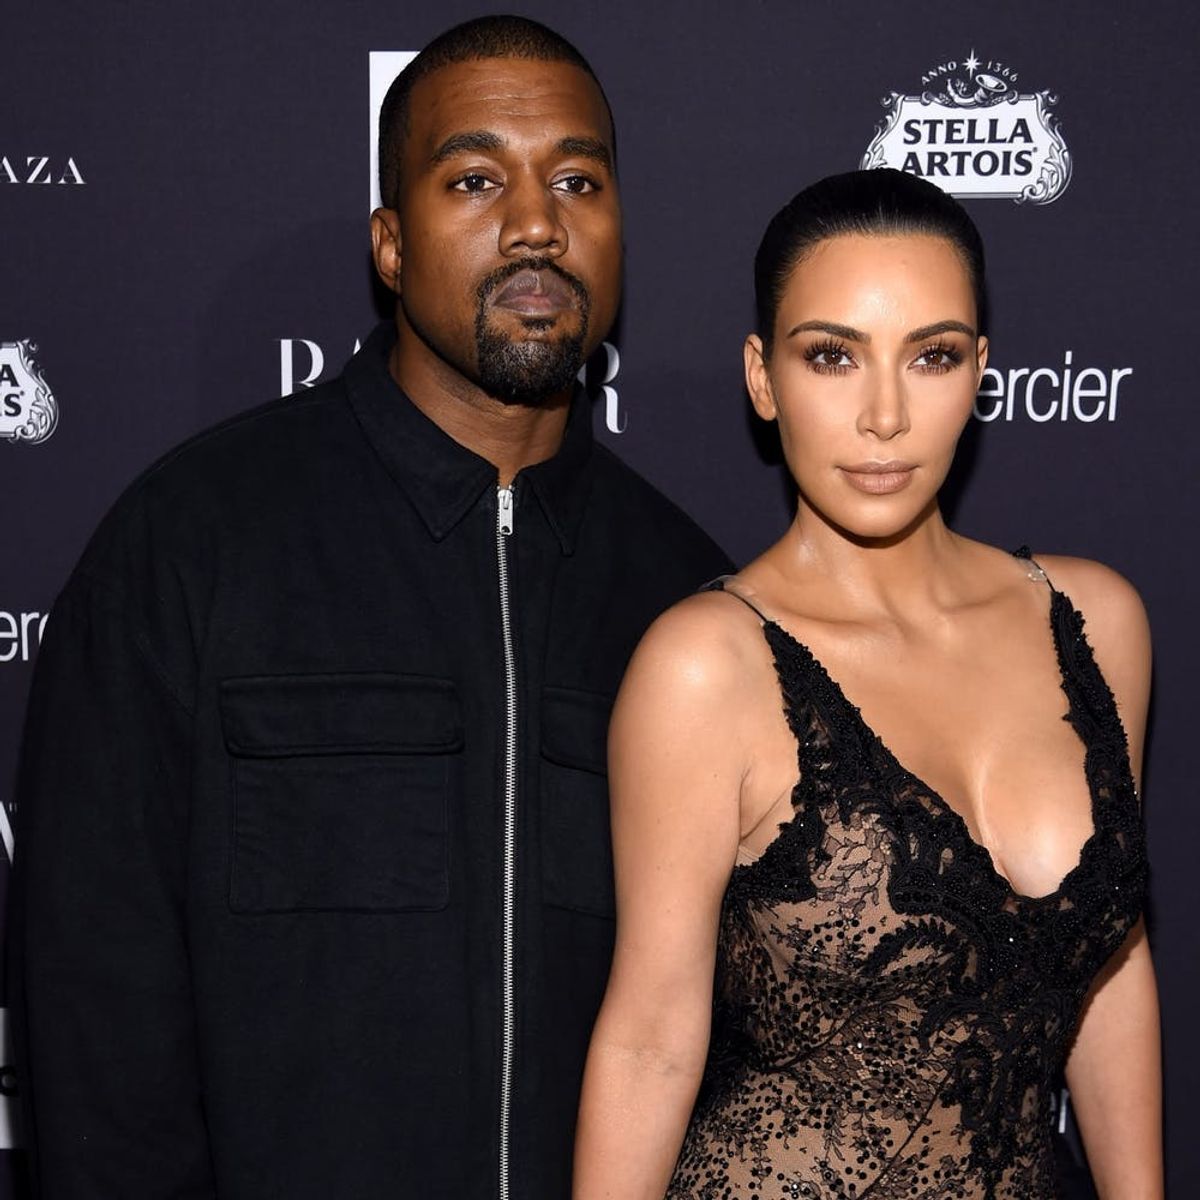 Kim Kardashian Doesn’t Think She’d Have Kanye West or the Kids If It Weren’t for “KUWTK”